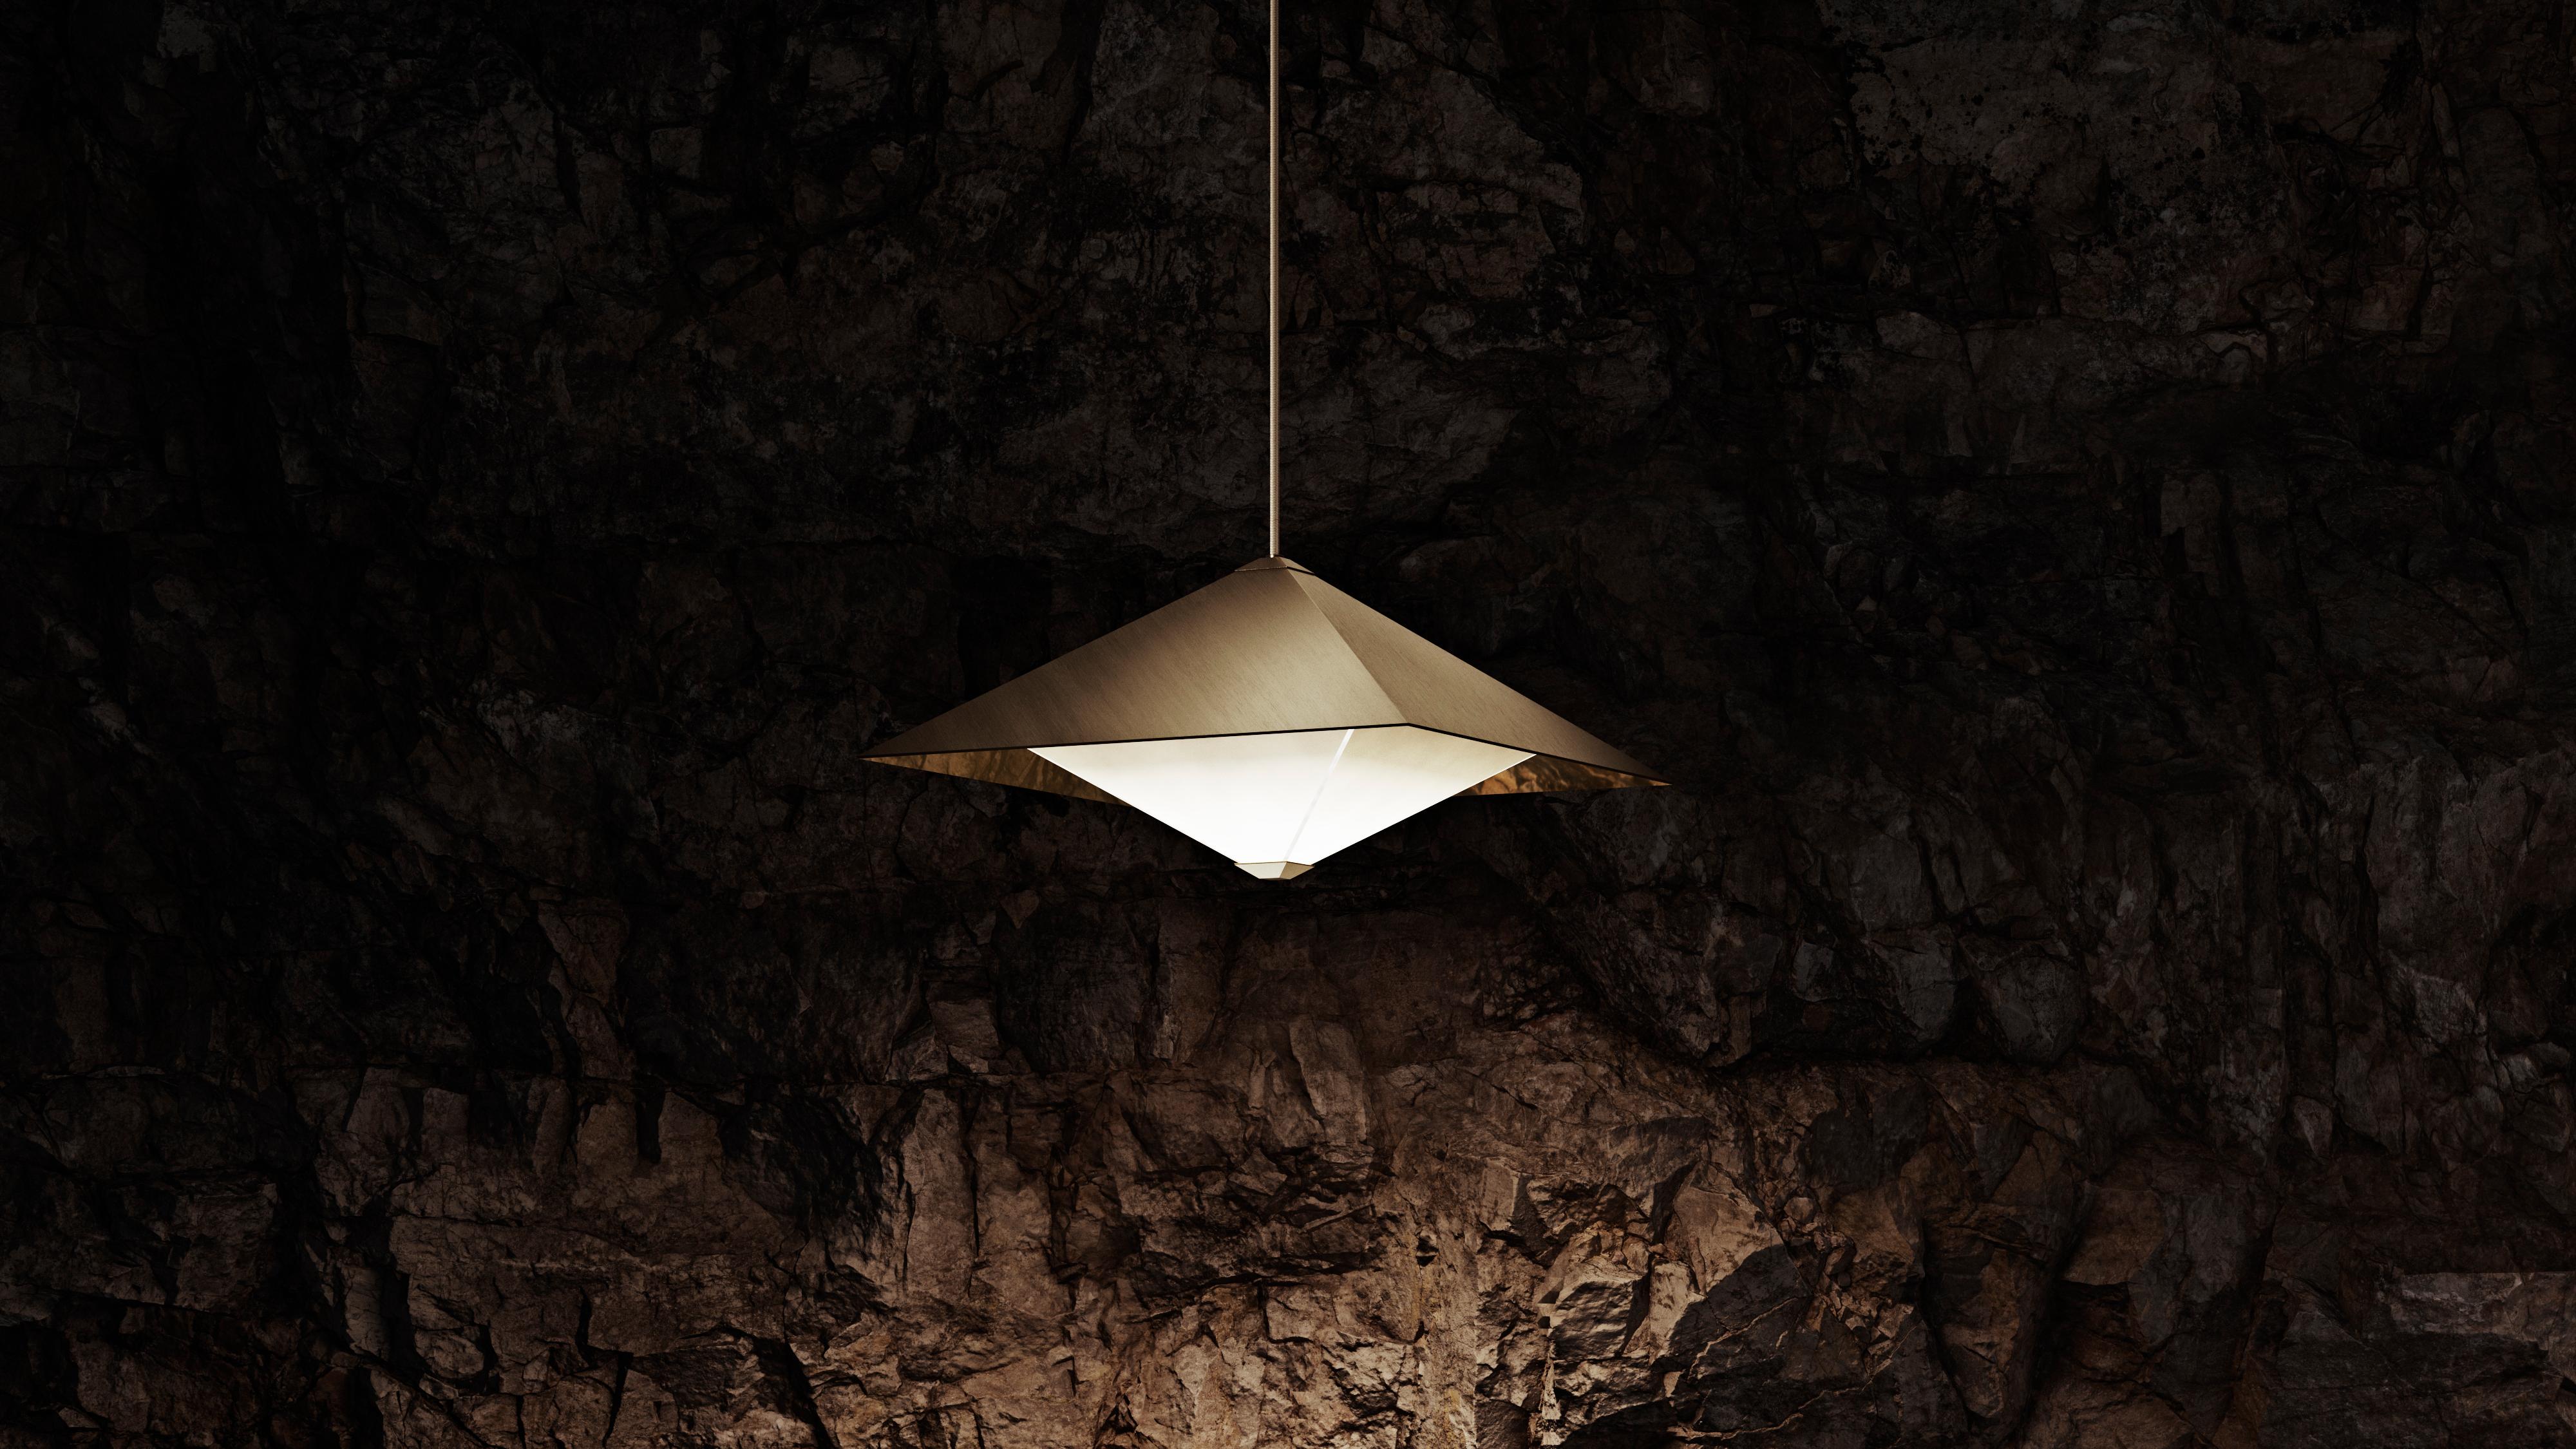 Octa pendant by Diaphan Studio

OCTA’s pendant originates from the intersection of two octahedral shapes. A brass shade and a frosted diffuser. The latter floats below the mirrored surfaces of the shade; shapes are reflected and multiplied,